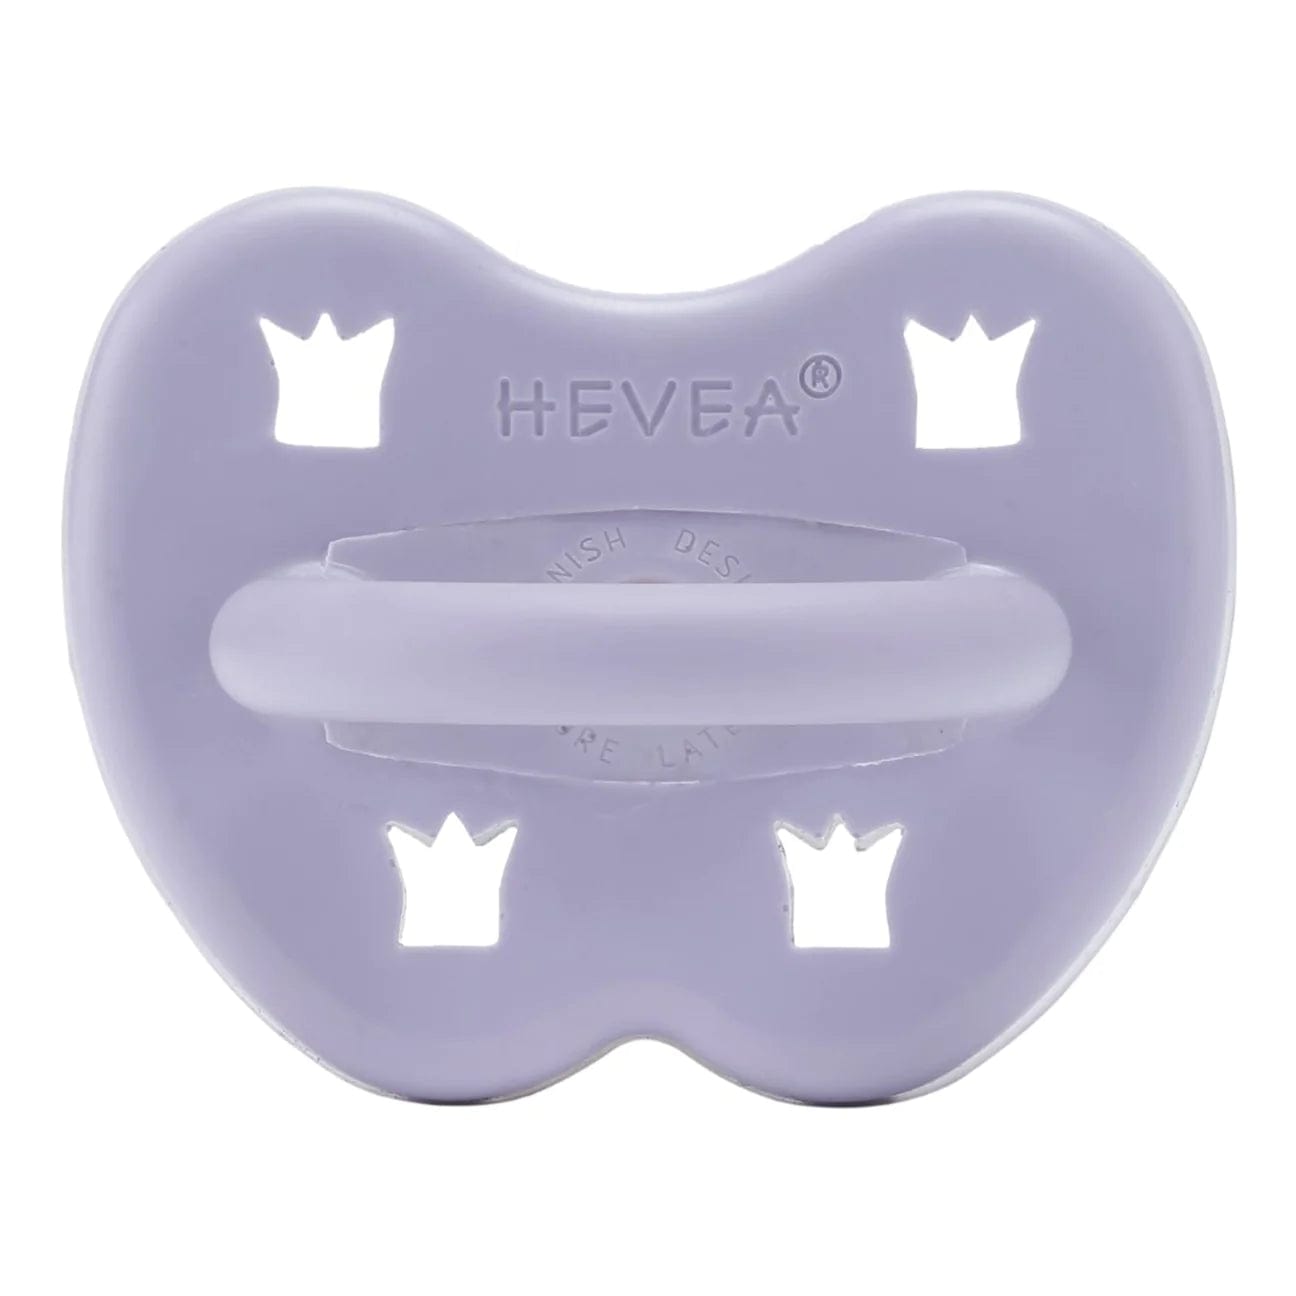 Hevea Pacifier Orthodontic Dusty Violet 3-36 months Hevea Pacifiers & Teethers Lil Tulips